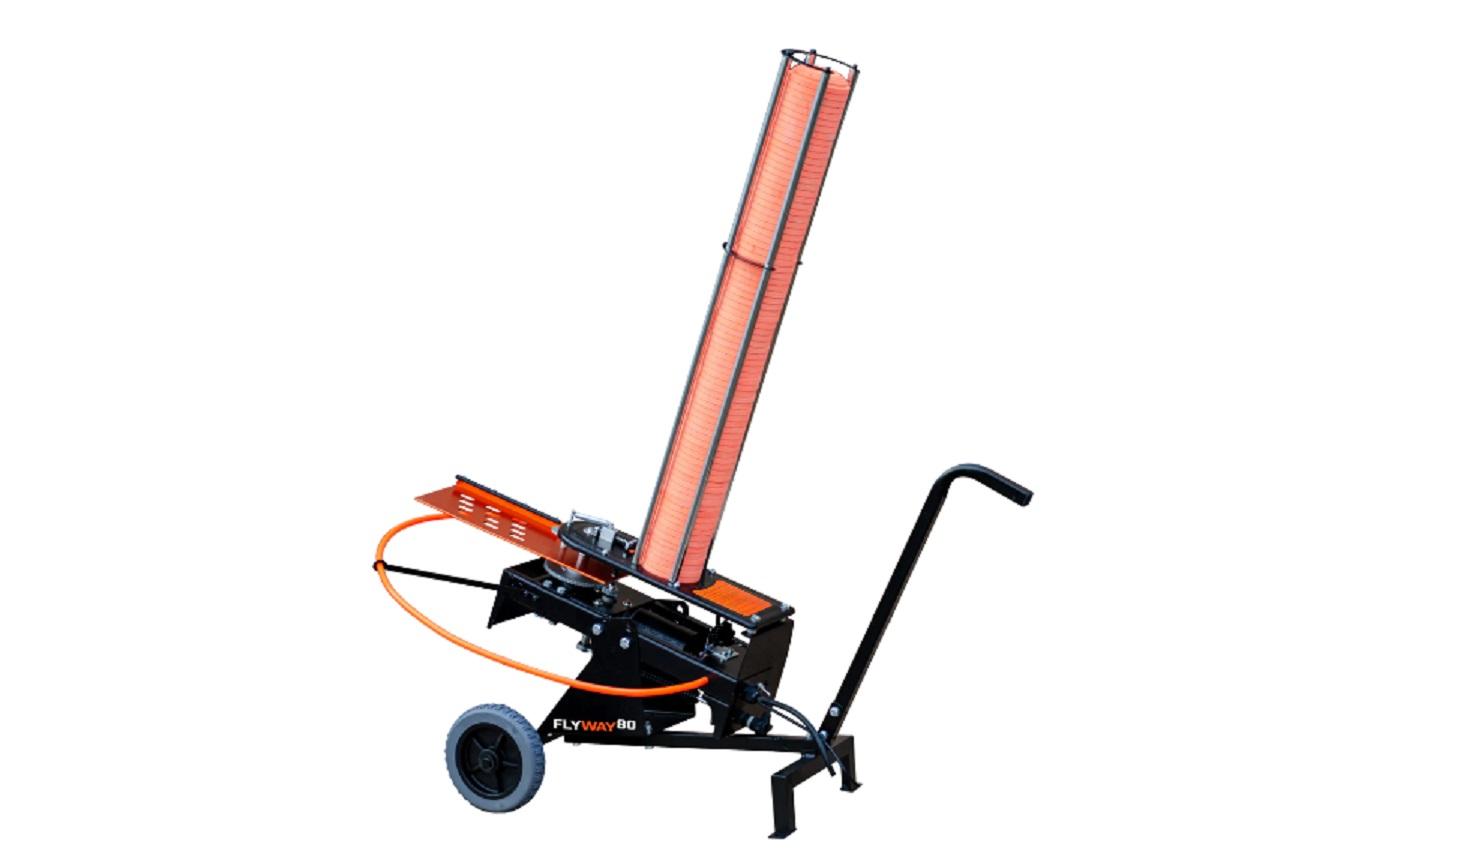 Do All Flyway 80 Clay Pigeon Thrower